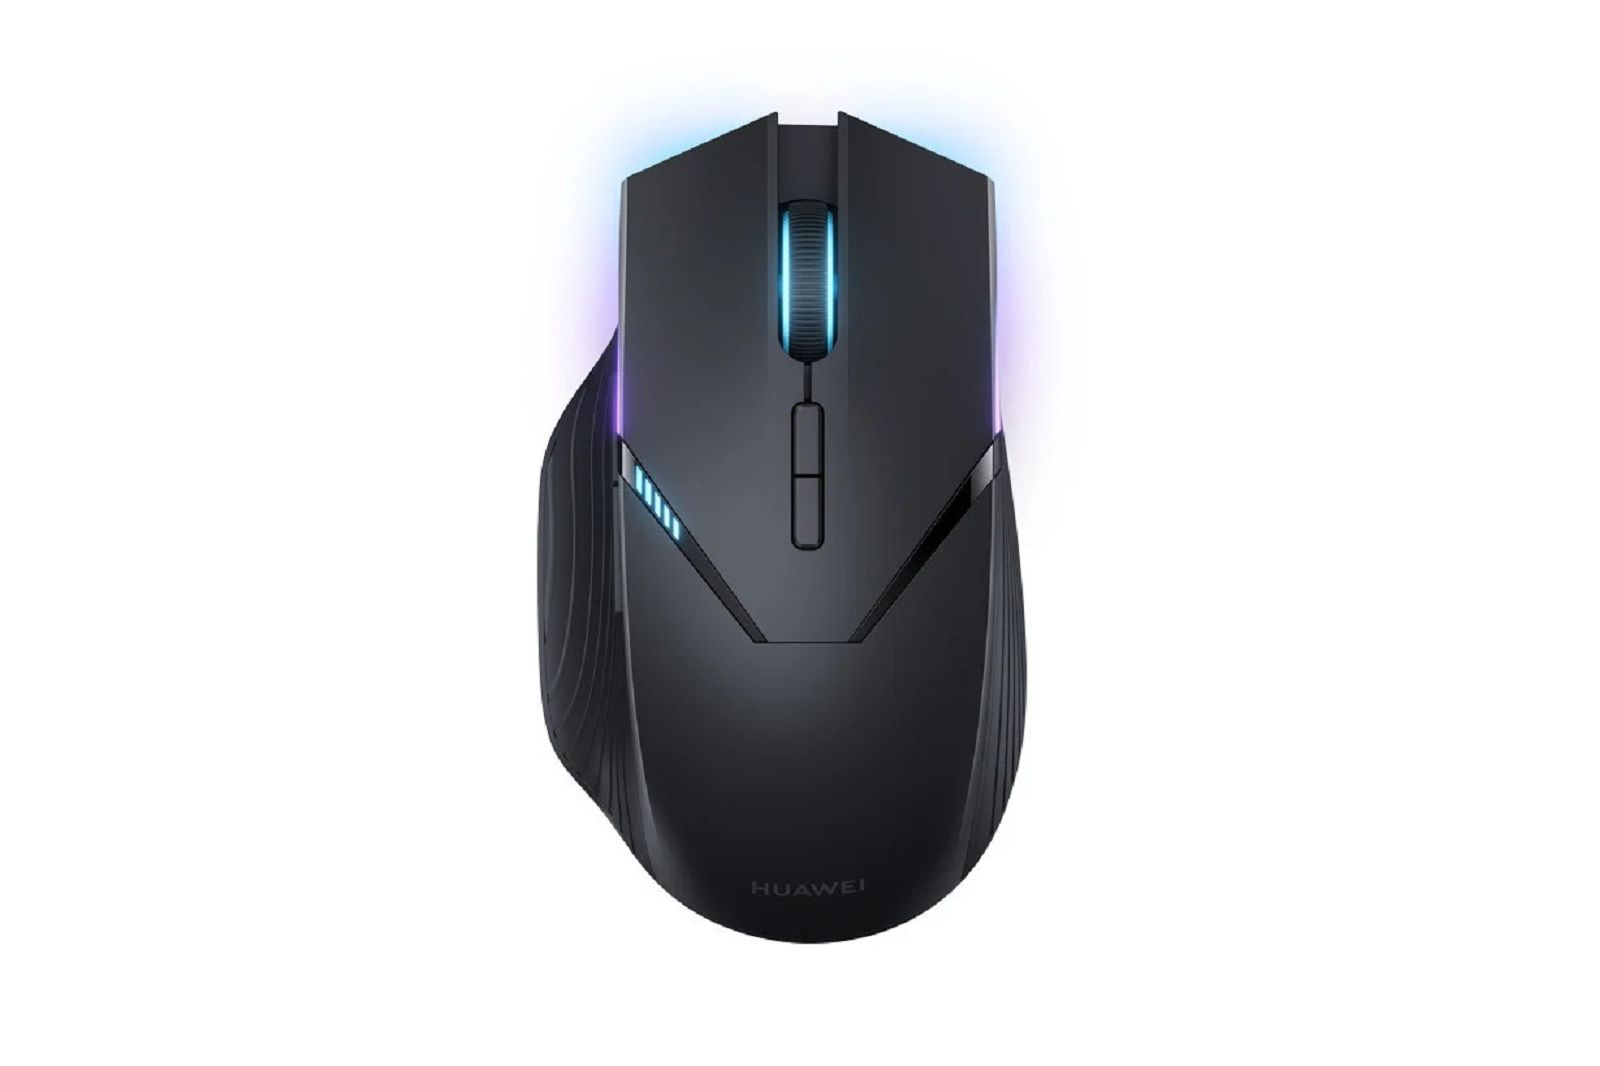 Huawei has a gaming mouse to match its gaming monitor photo 1